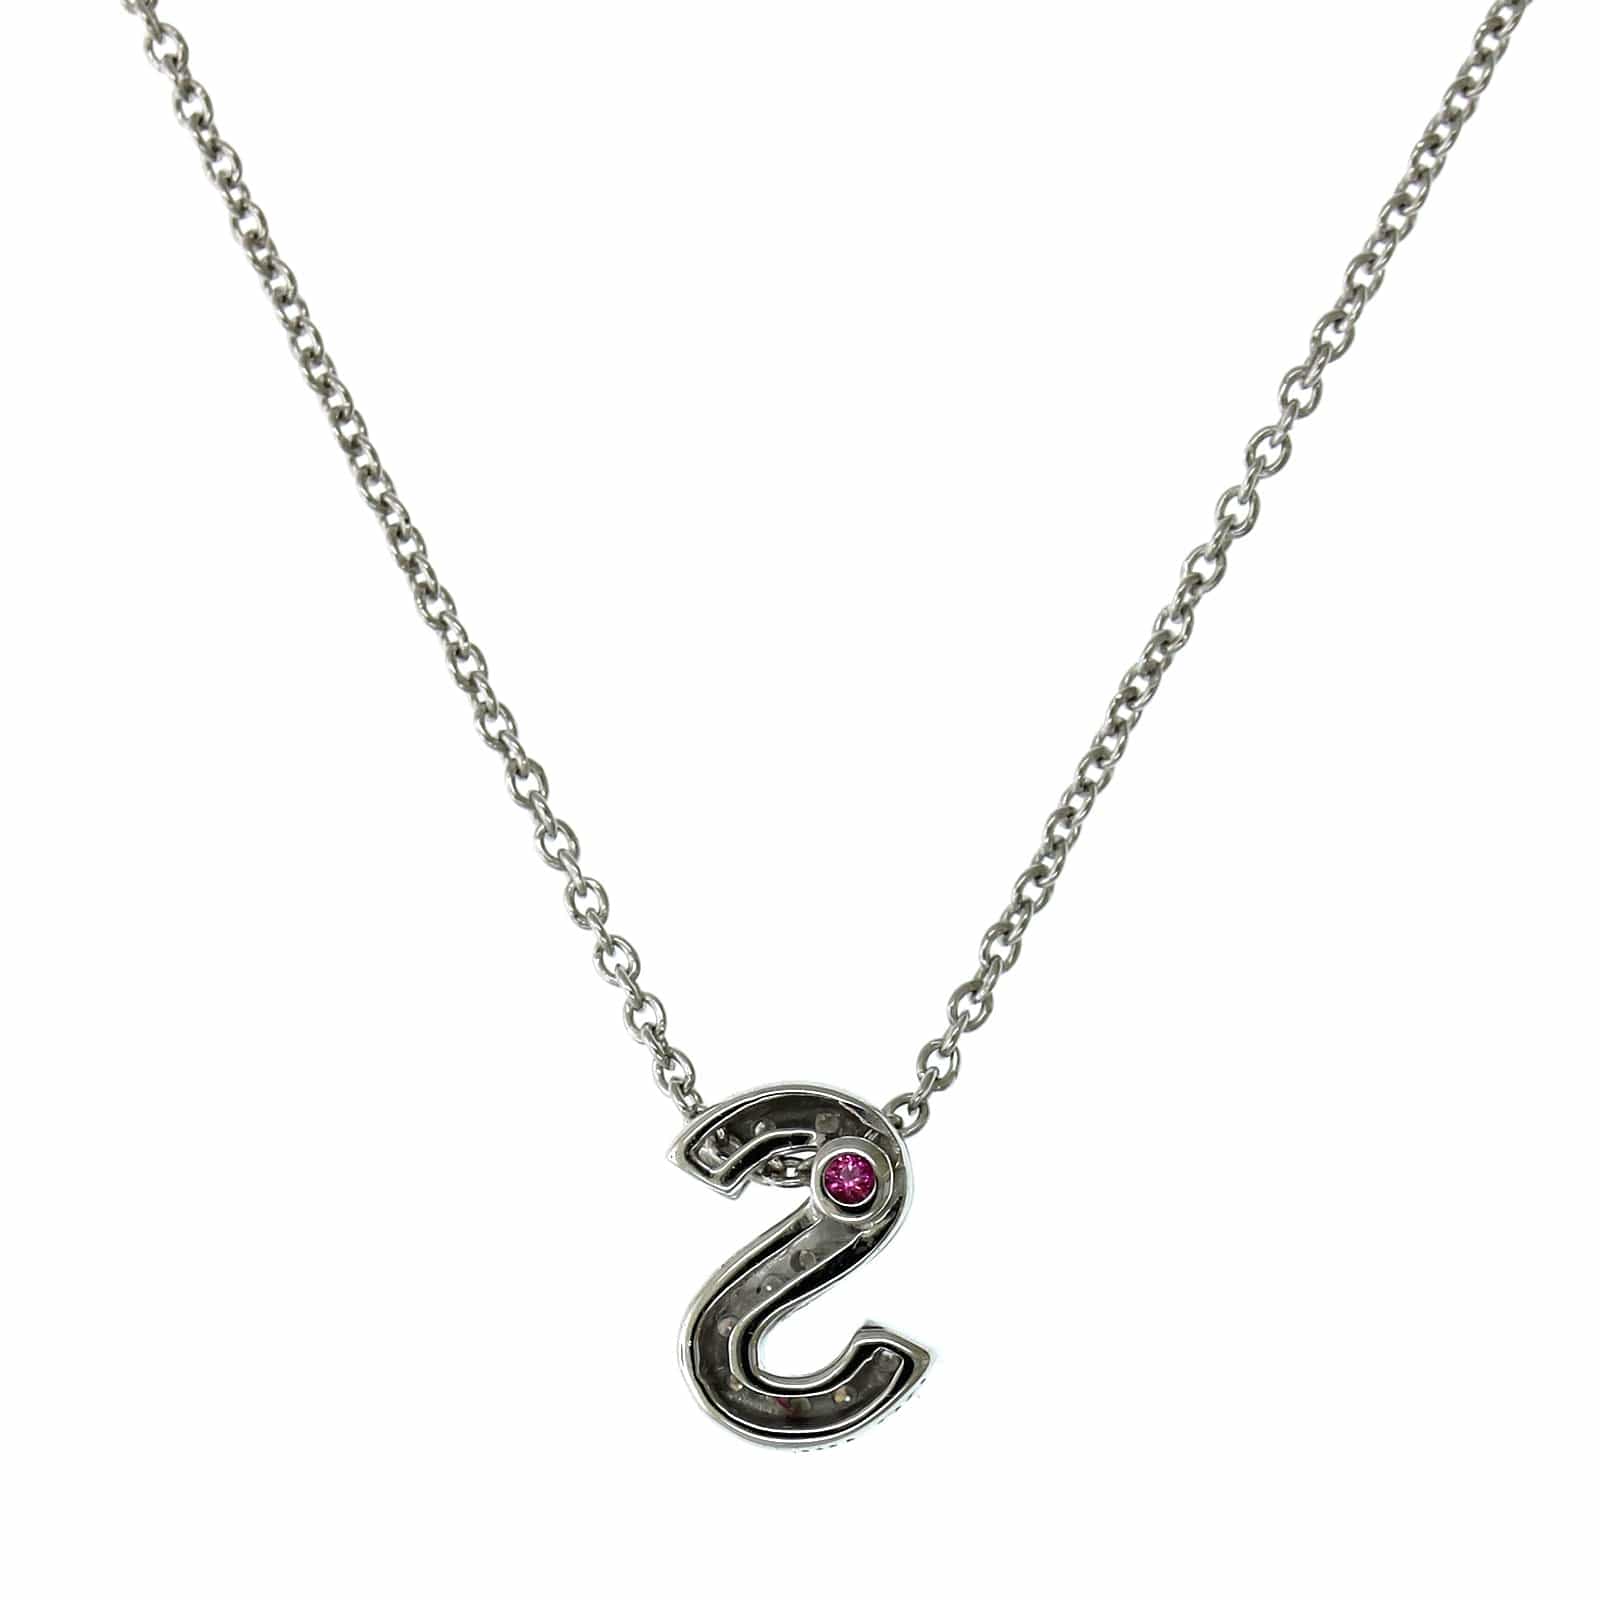 Roberto Coin 18K White Gold "S" Initial Diamond Necklace